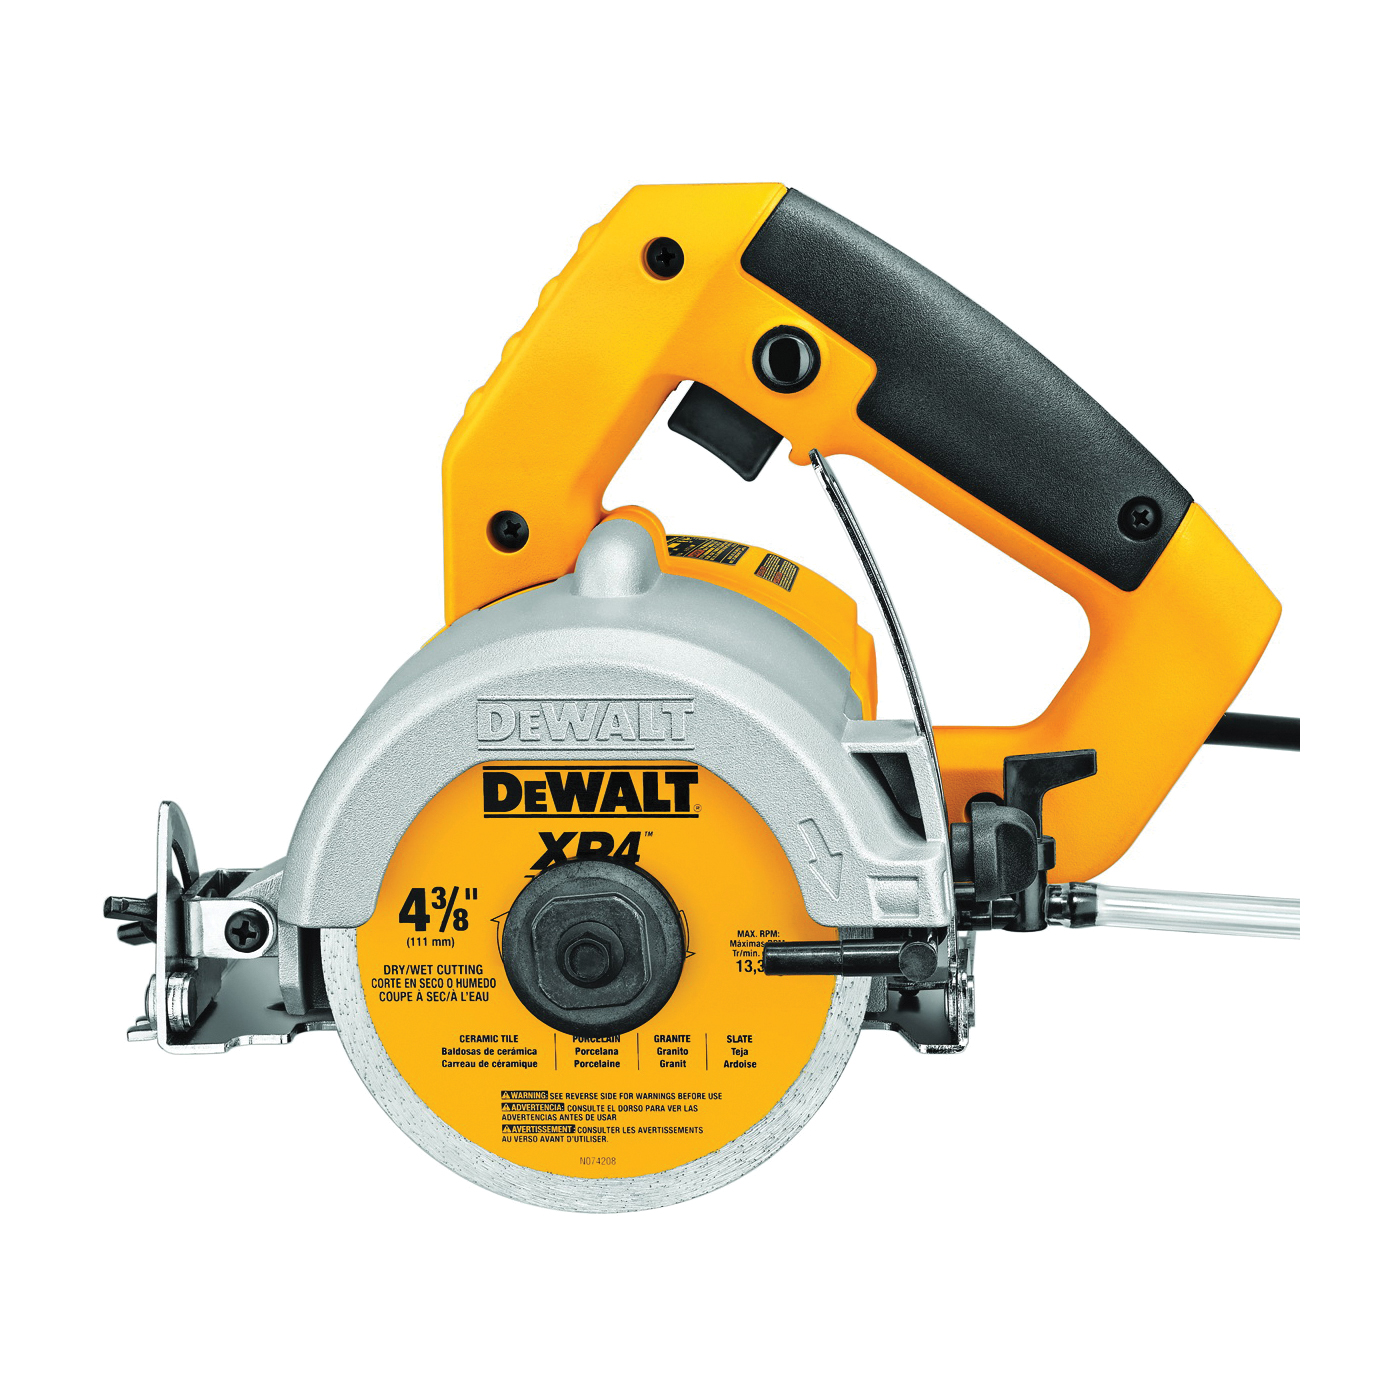 DWC860W Tile Saw, 4-3/8 in Blade, 1-3/8 in at 90 deg, 3-1/8 in Max D Cutting